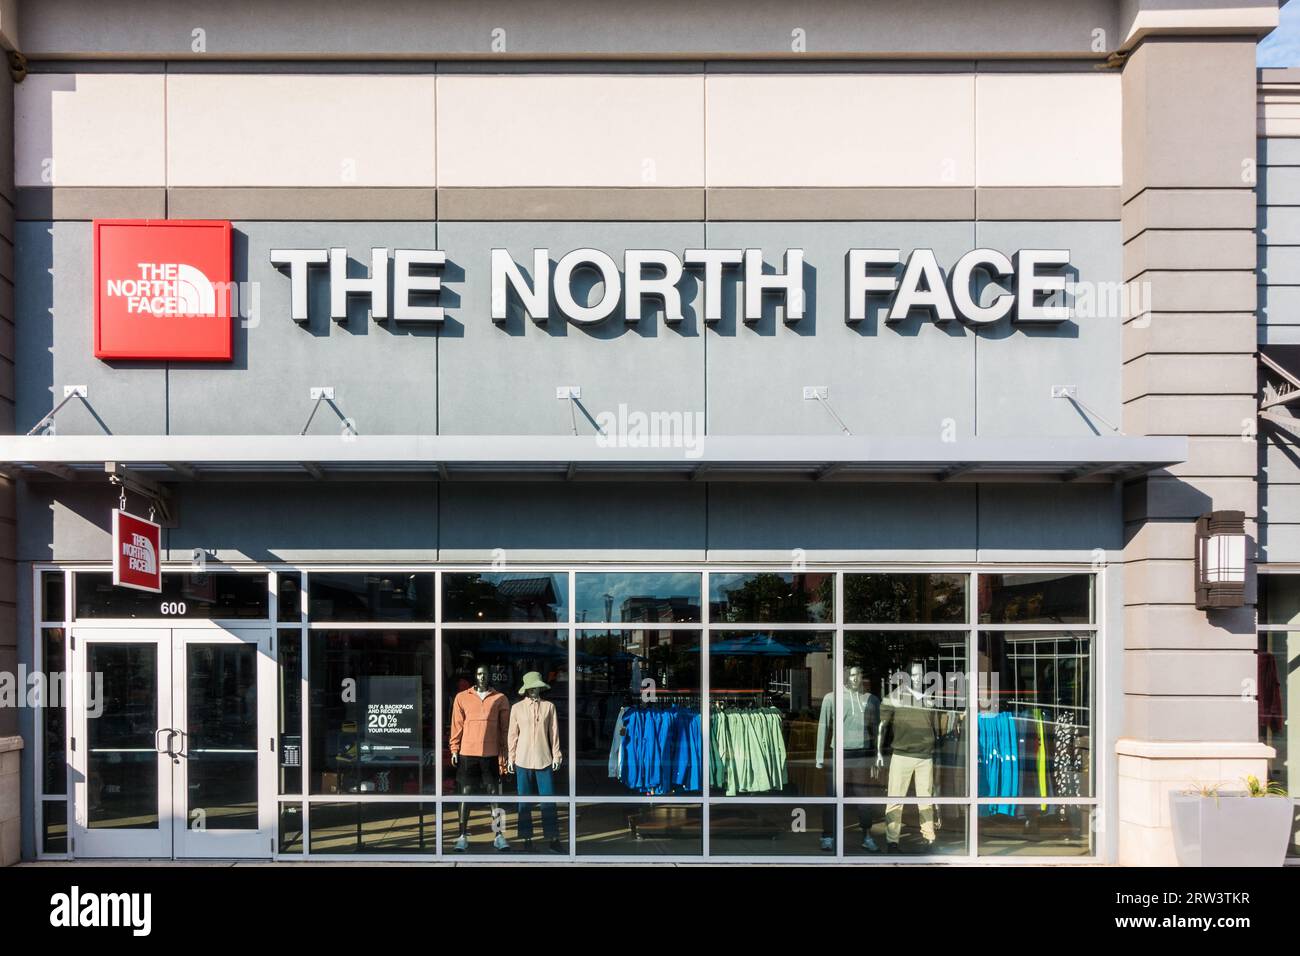 North Face shop front Stock Photo